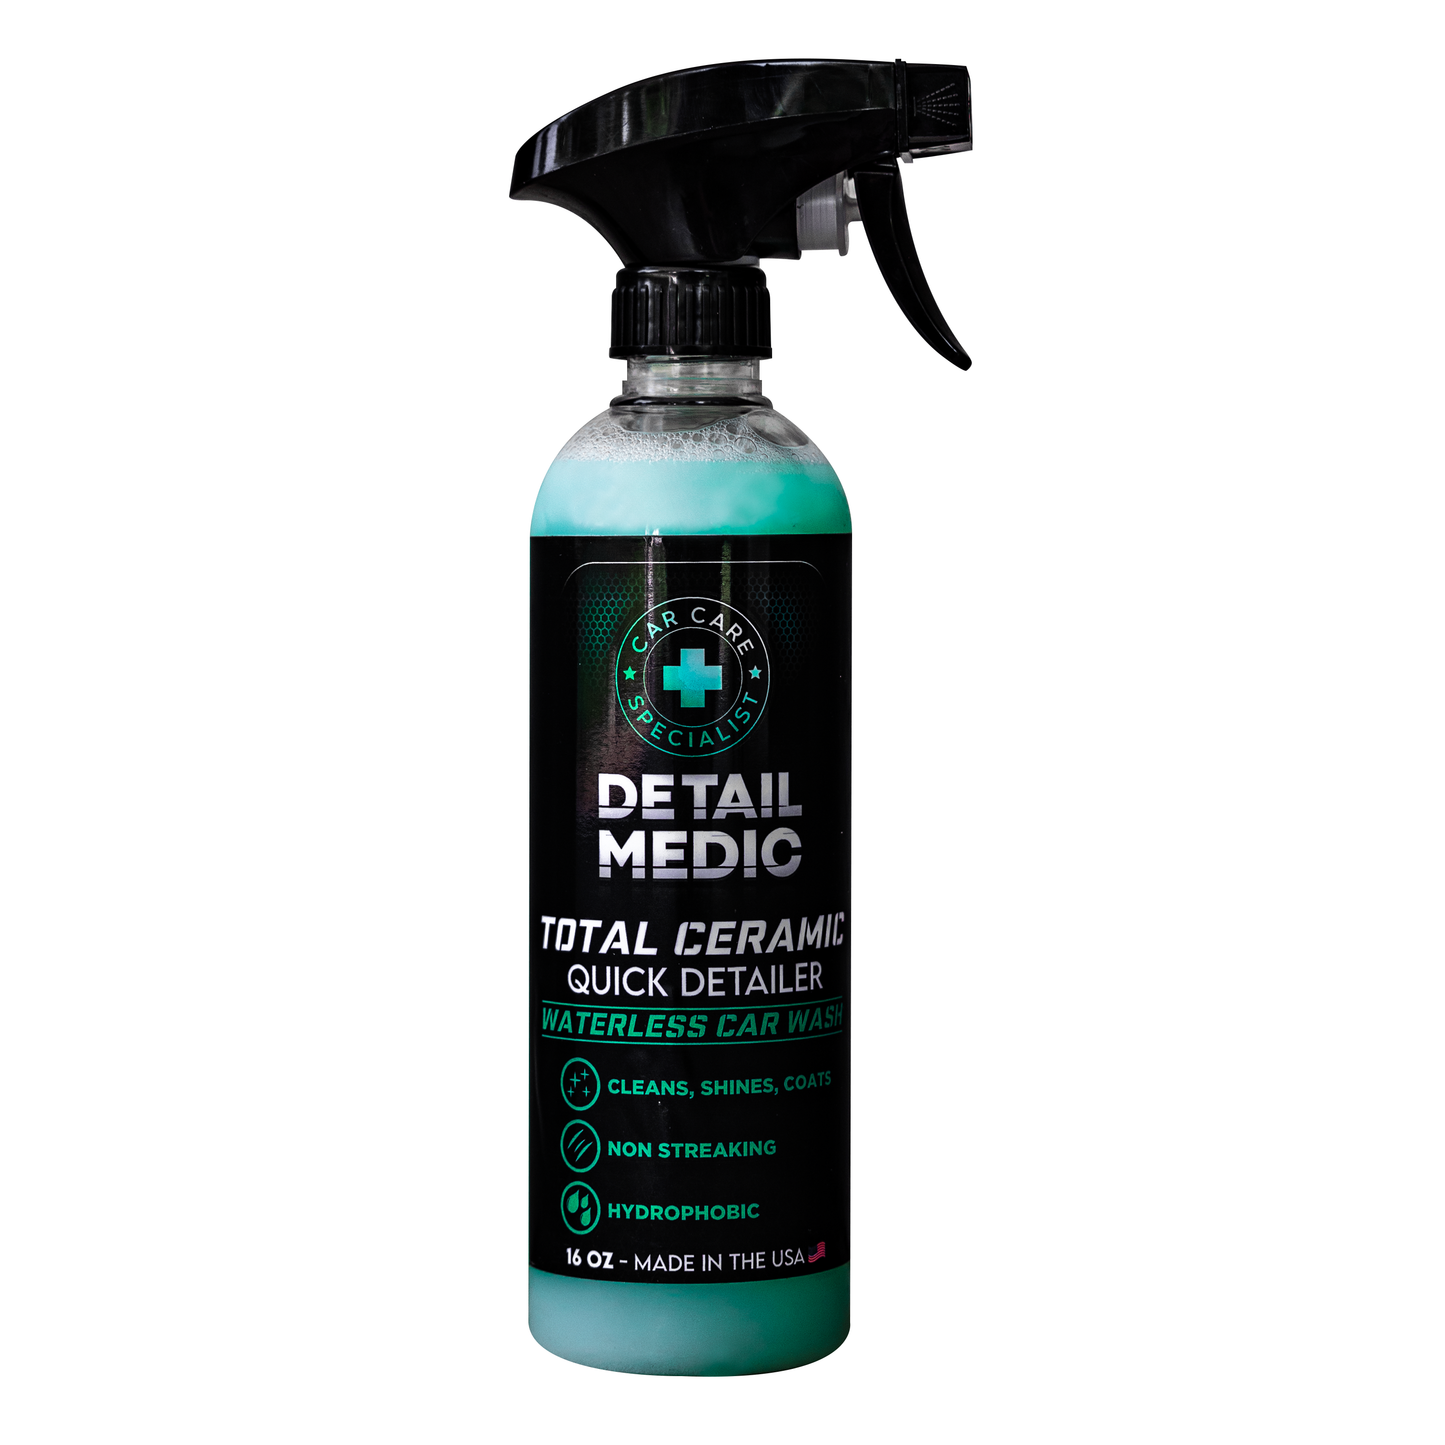 Benefits Ultimate Paint Sealant 50x Stronger Than Car Wax Creates A Diamond Like Shine Protects Against Water Spots Guards Against UV Damage Super Hydrophobic